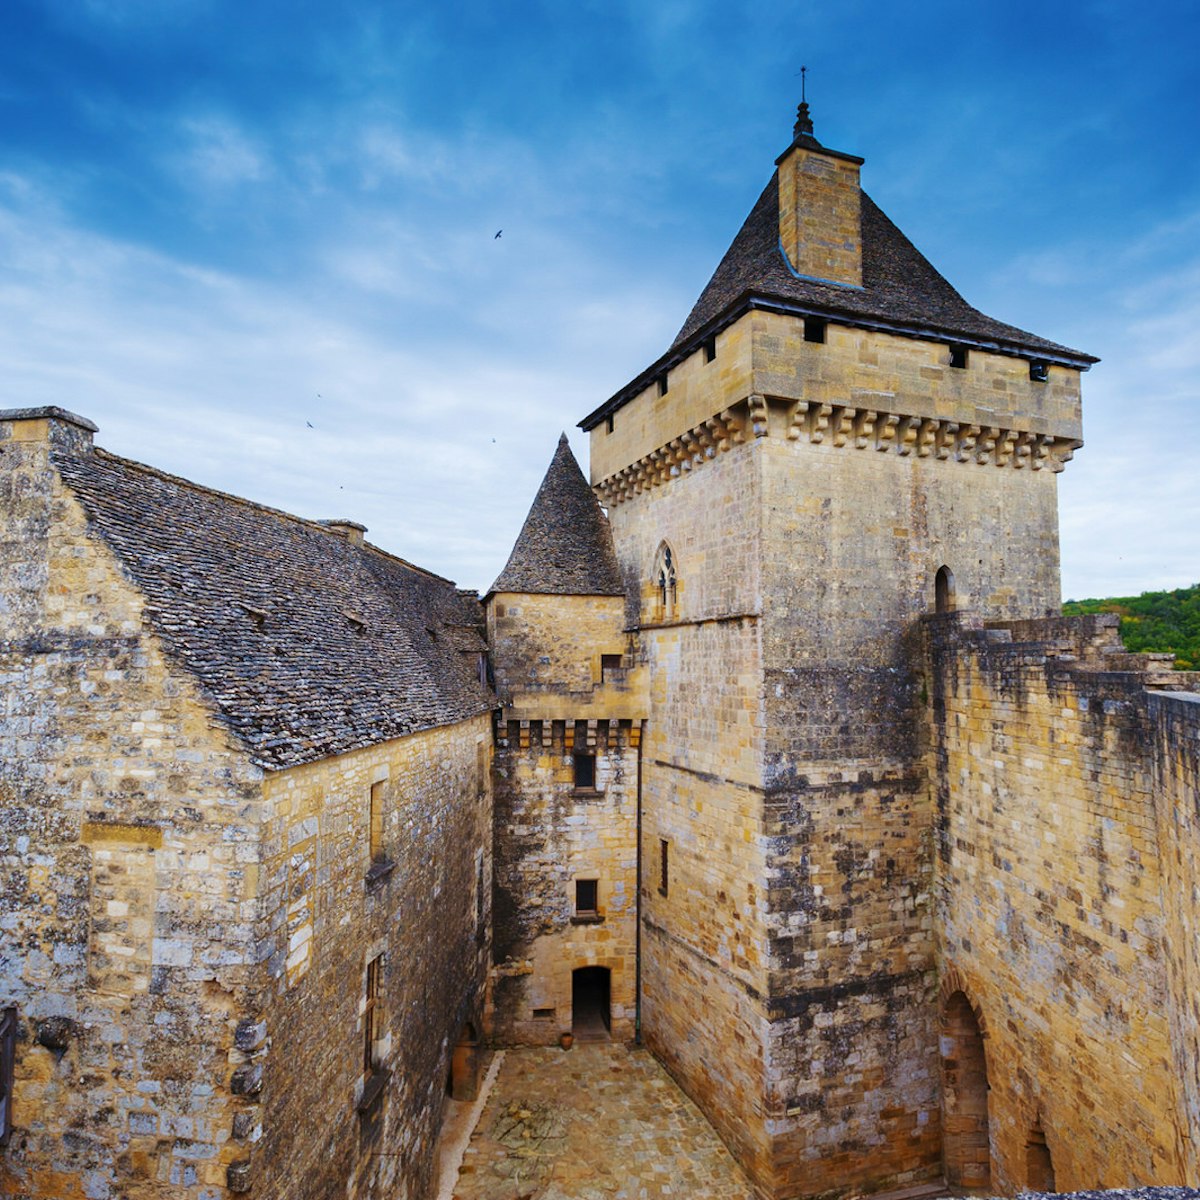 castle of castelnaud la chapelle dordogne perigord France; Shutterstock ID 131409035; Your name (First / Last): Emma Sparks; GL account no.: 65050; Netsuite department name: Online Editorial; Full Product or Project name including edition: Best in Europe POI updates